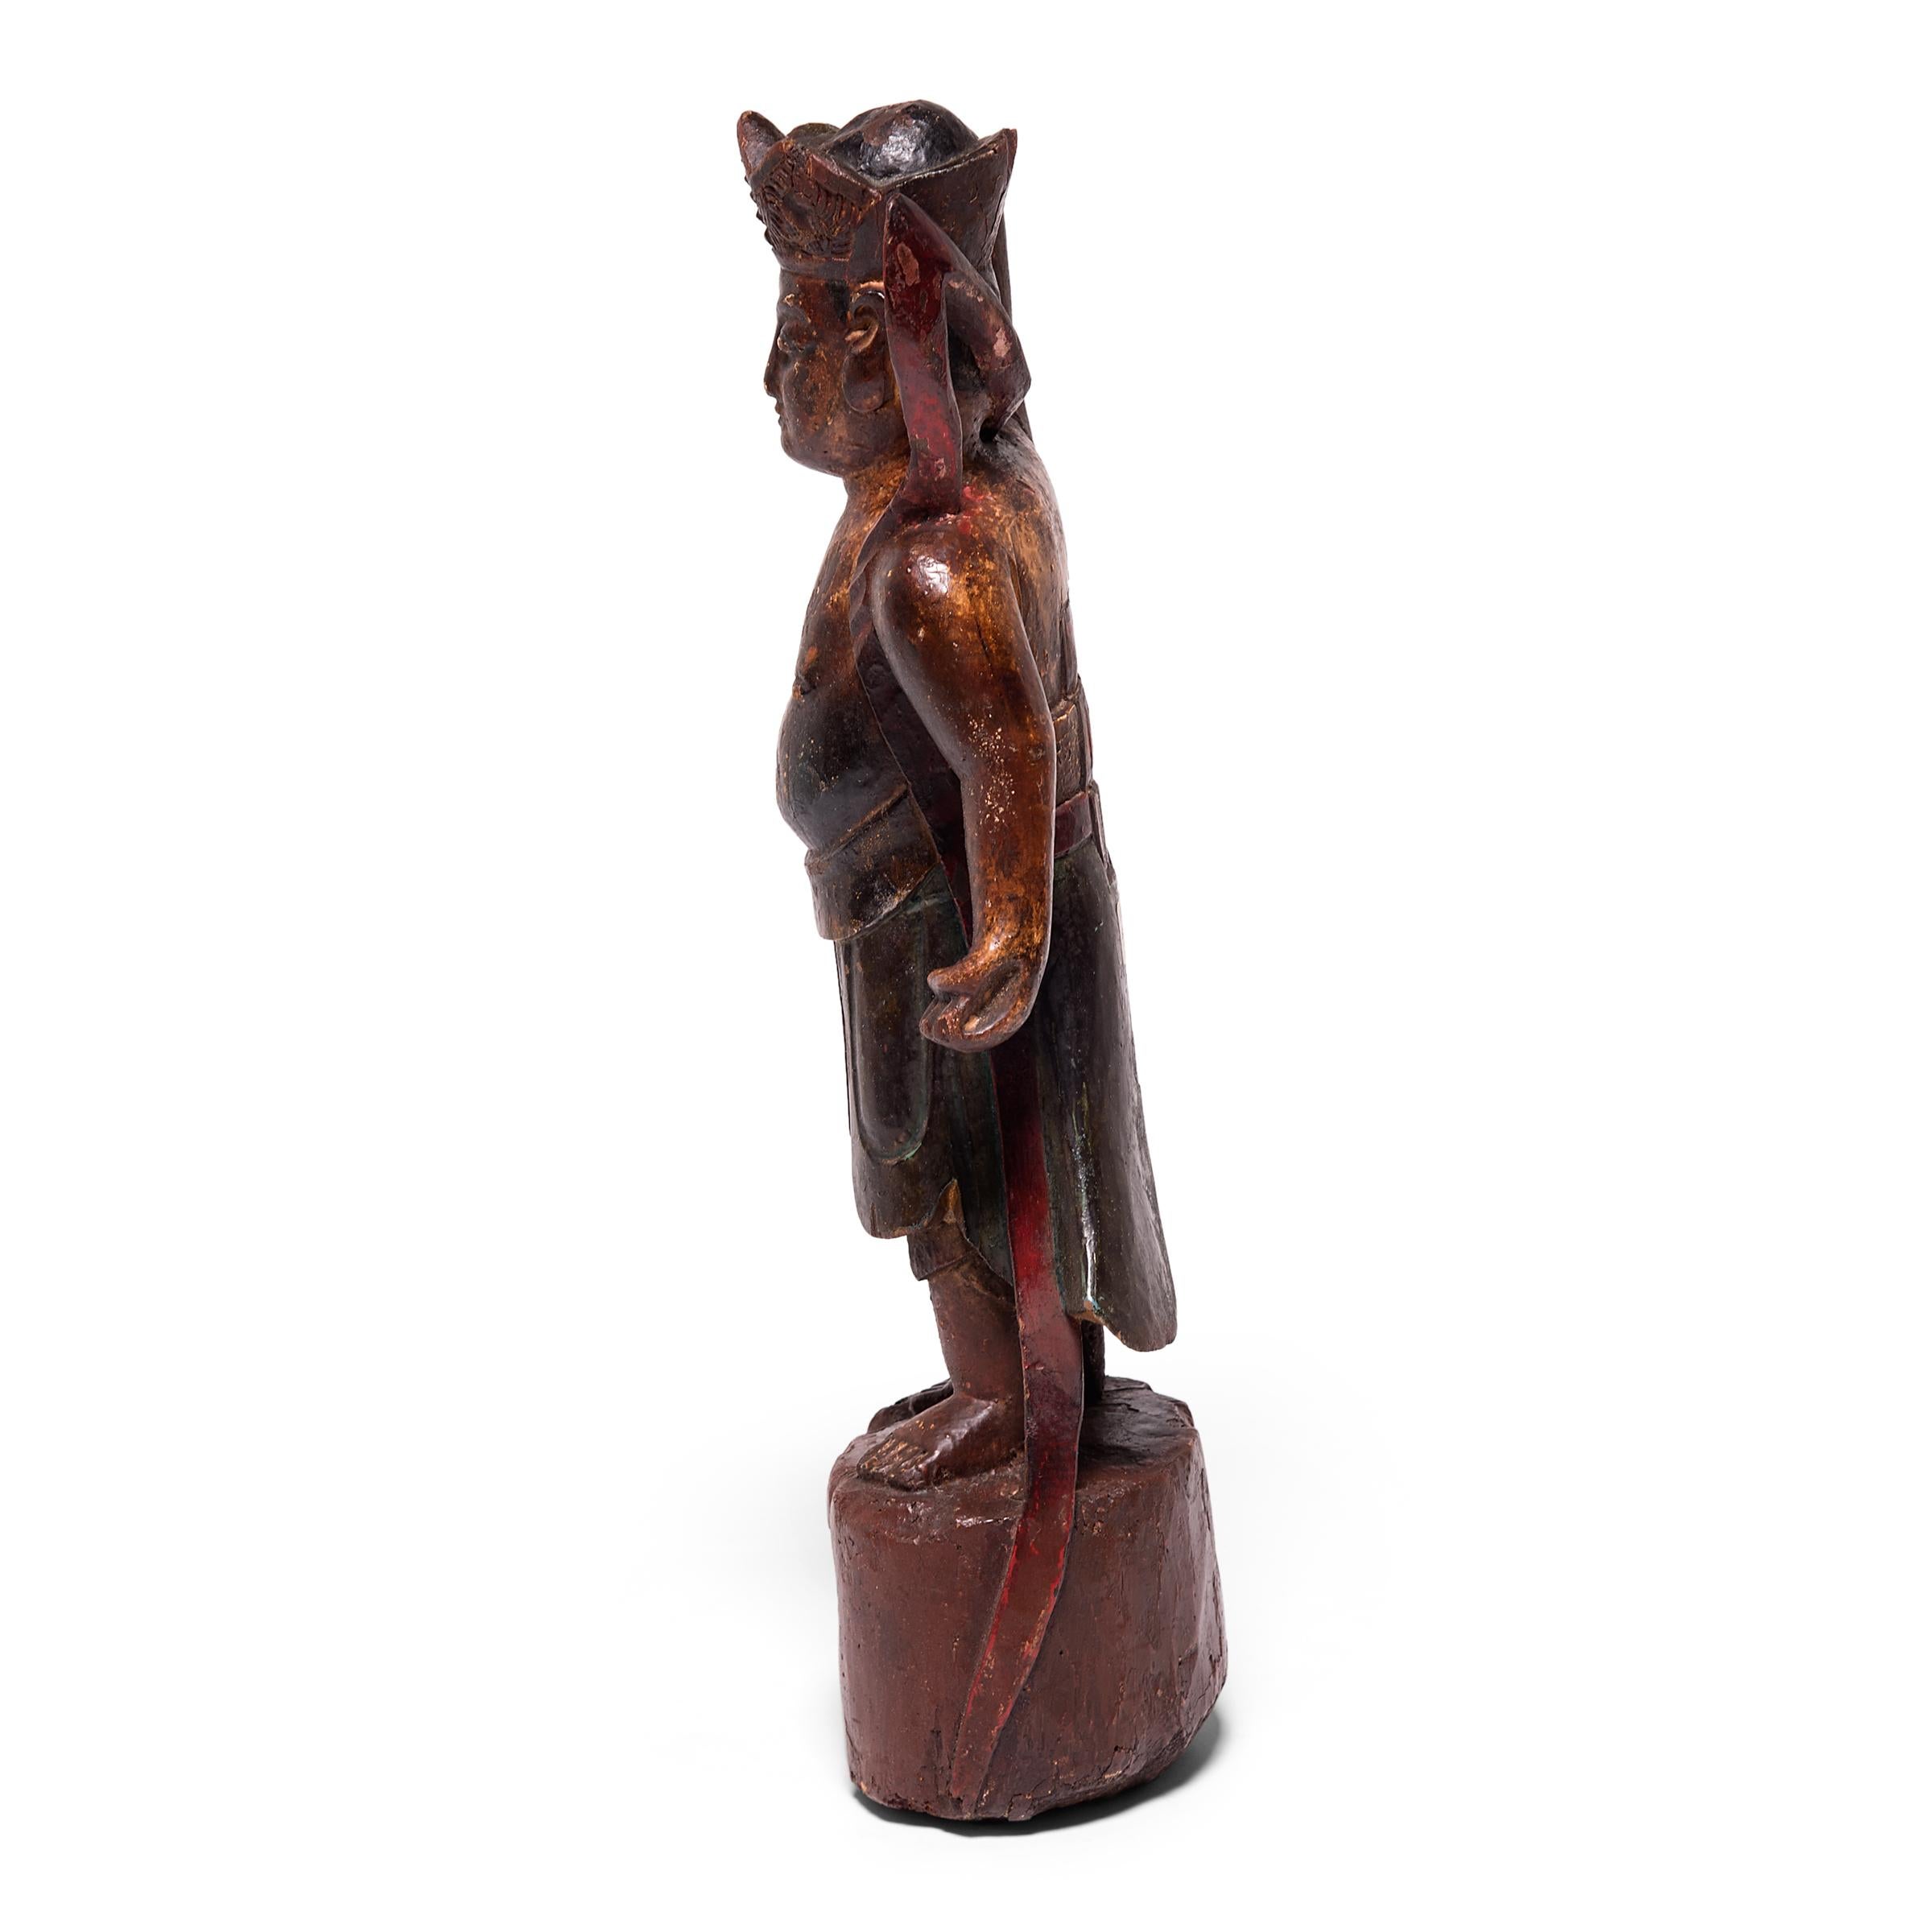 Hand carved and vibrantly painted, this 19th century figure of a mythical spirit was once placed upon a traditional altar table to pay tribute to ancestors past. The figure is carved with detailed robes, an elaborate hat, and long ribbon flowing